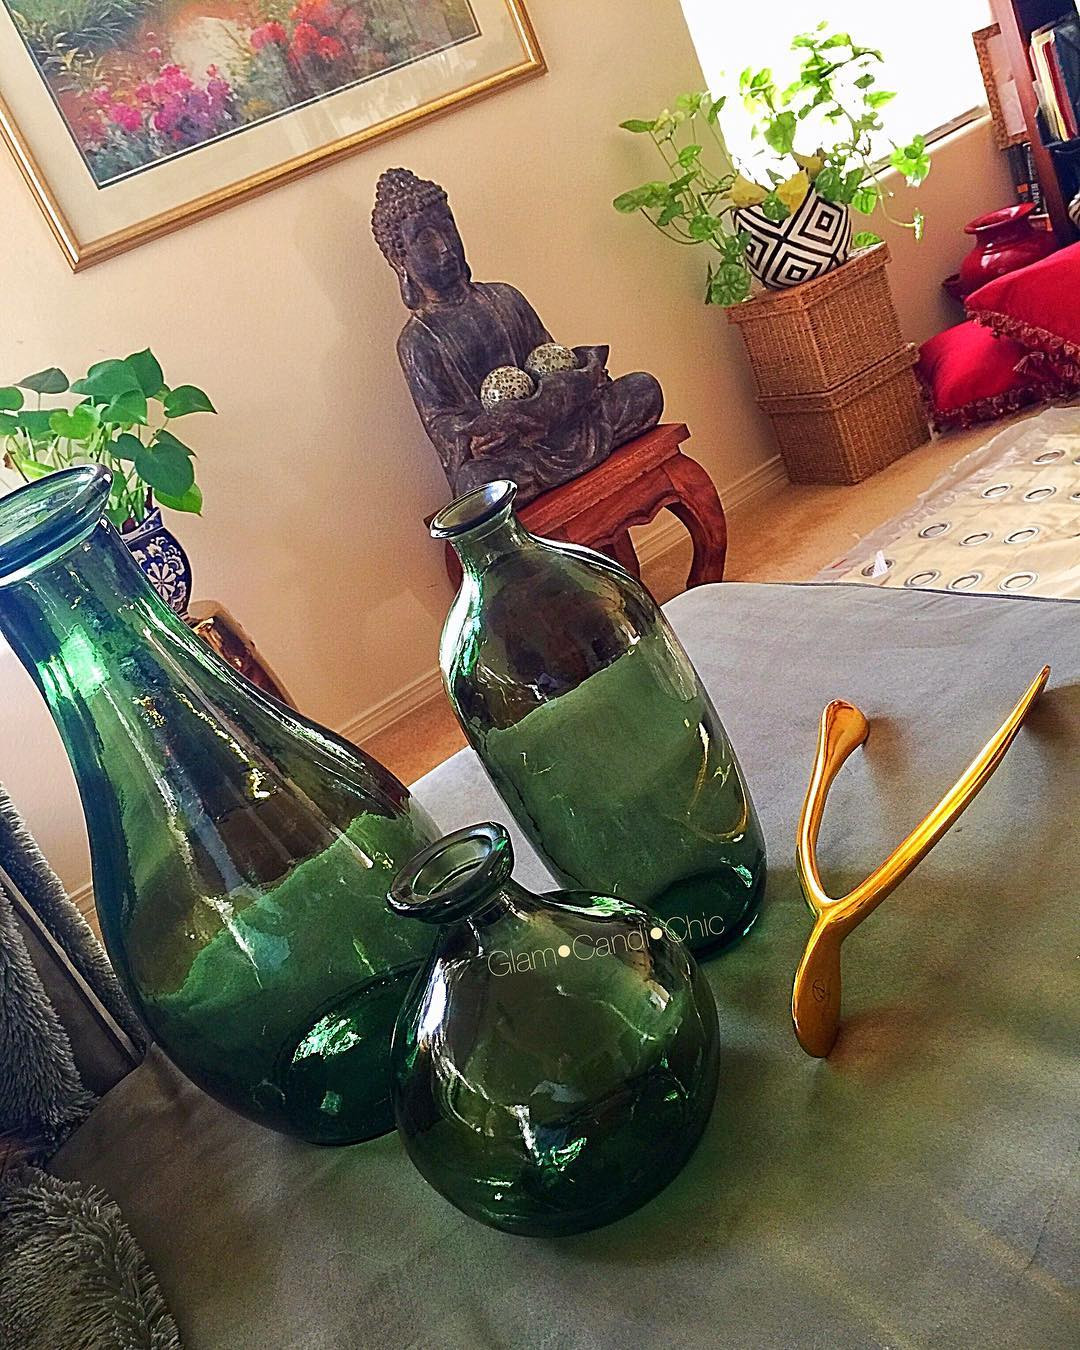 30 Elegant Tj Maxx Glass Vases 2024 free download tj maxx glass vases of glamcandichic hash tags deskgram for e280a2green gold chice280a2 so this happened yesterday tjmaxx lunch breaks seem to